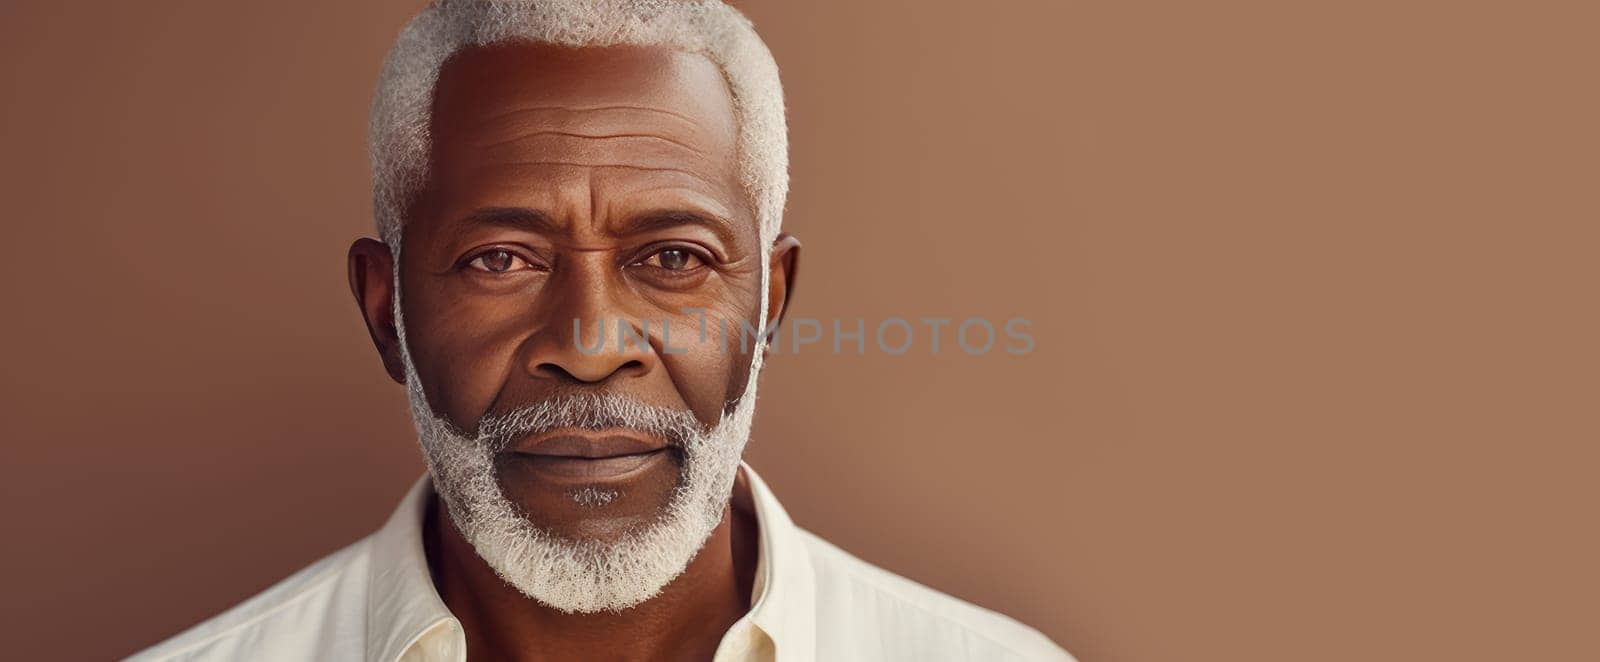 Handsome elegant, elderly African American man, creamy beige background, banner, close-up, copy space. Advertising of cosmetic products, spa treatments, shampoos and hair care products, dentistry and medicine, perfumes and cosmetology for senior men.